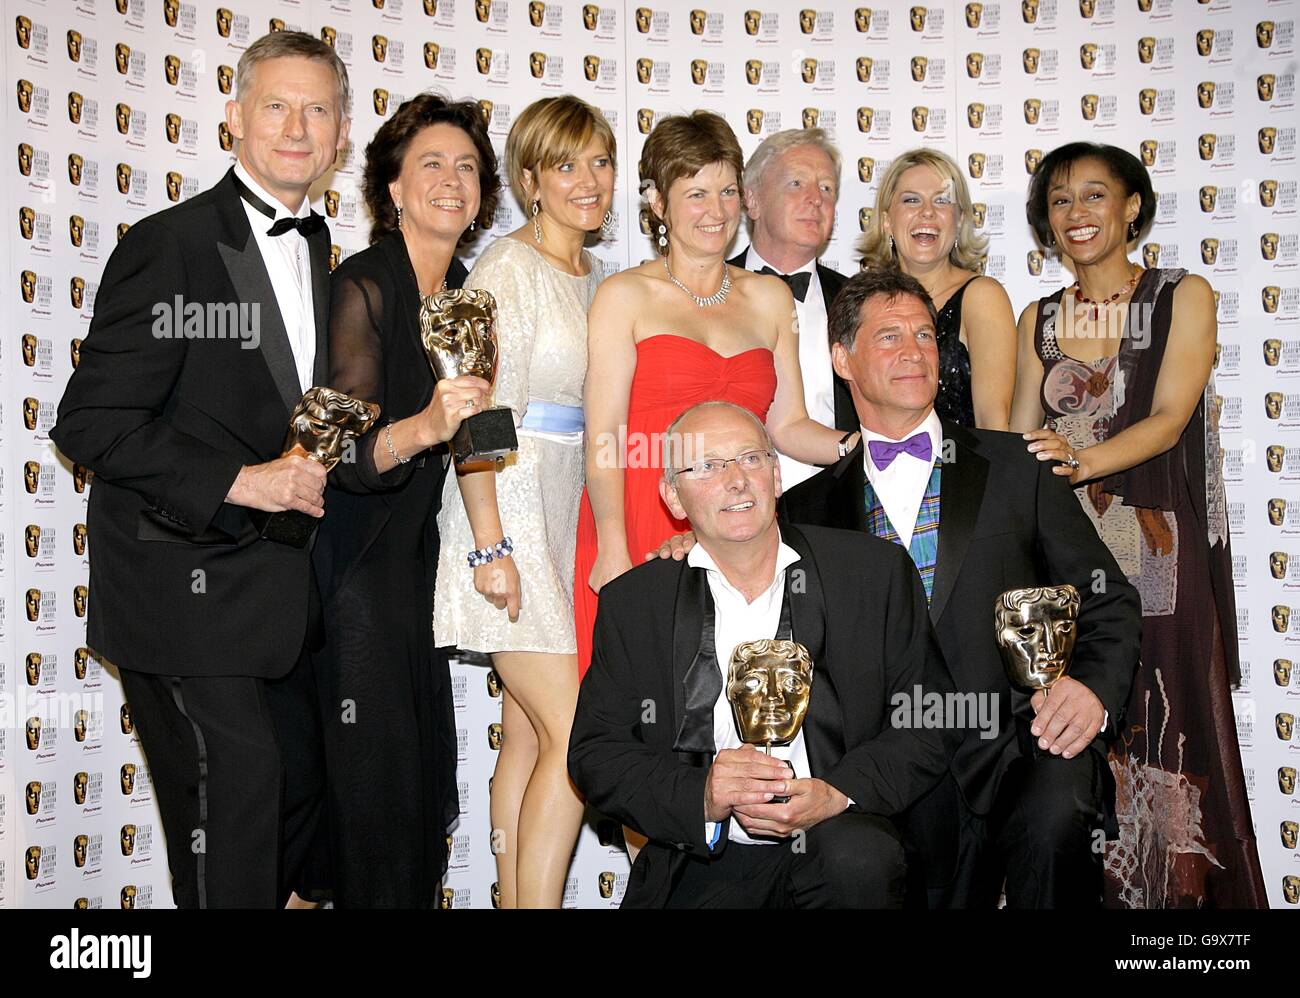 The cast of Casualty with the award for Continuing Drama at the British Academy Television Awards, held at the London Palladium, central London. PRESS ASSOCIATION Photo. Picture date: Sunday 20 May 2007. Photo credit should read: Yui Mok/PA Wire Stock Photo